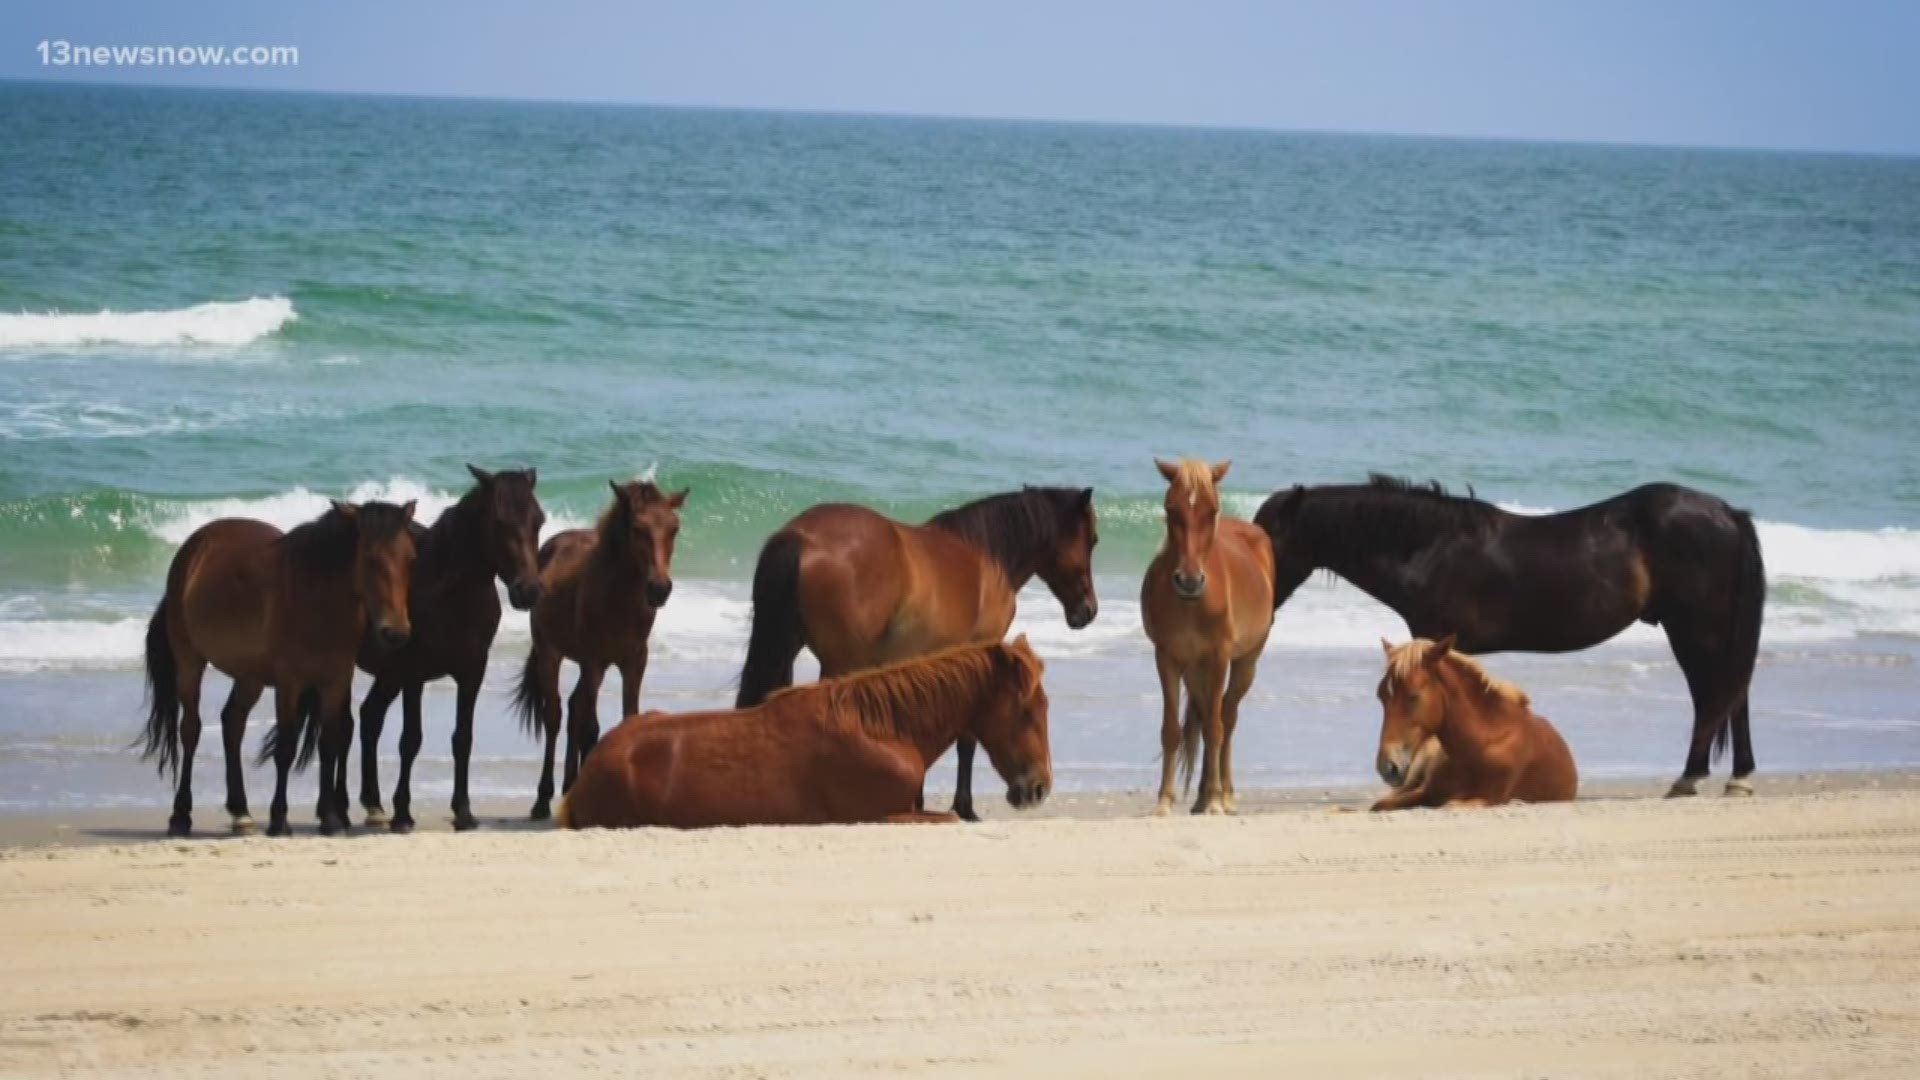 Believe it or not, according to the Corolla Wild Horse Fund, the animals are better equipped to handle a hurricane than most people on the Outer Banks. Preparations are underway over at the rescue farm.